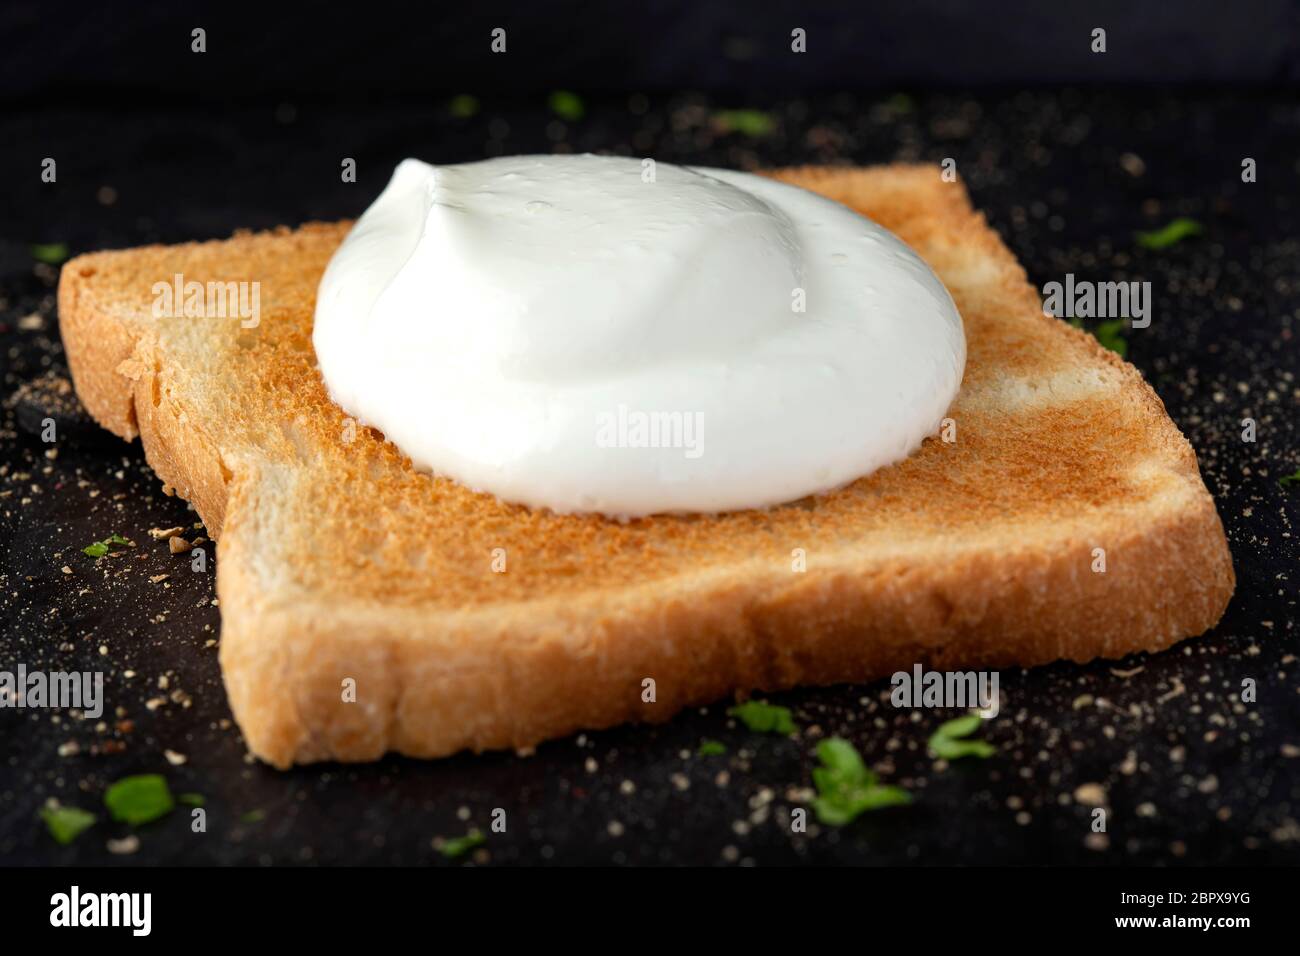 Toast with fresh cream and herbs Stock Photo